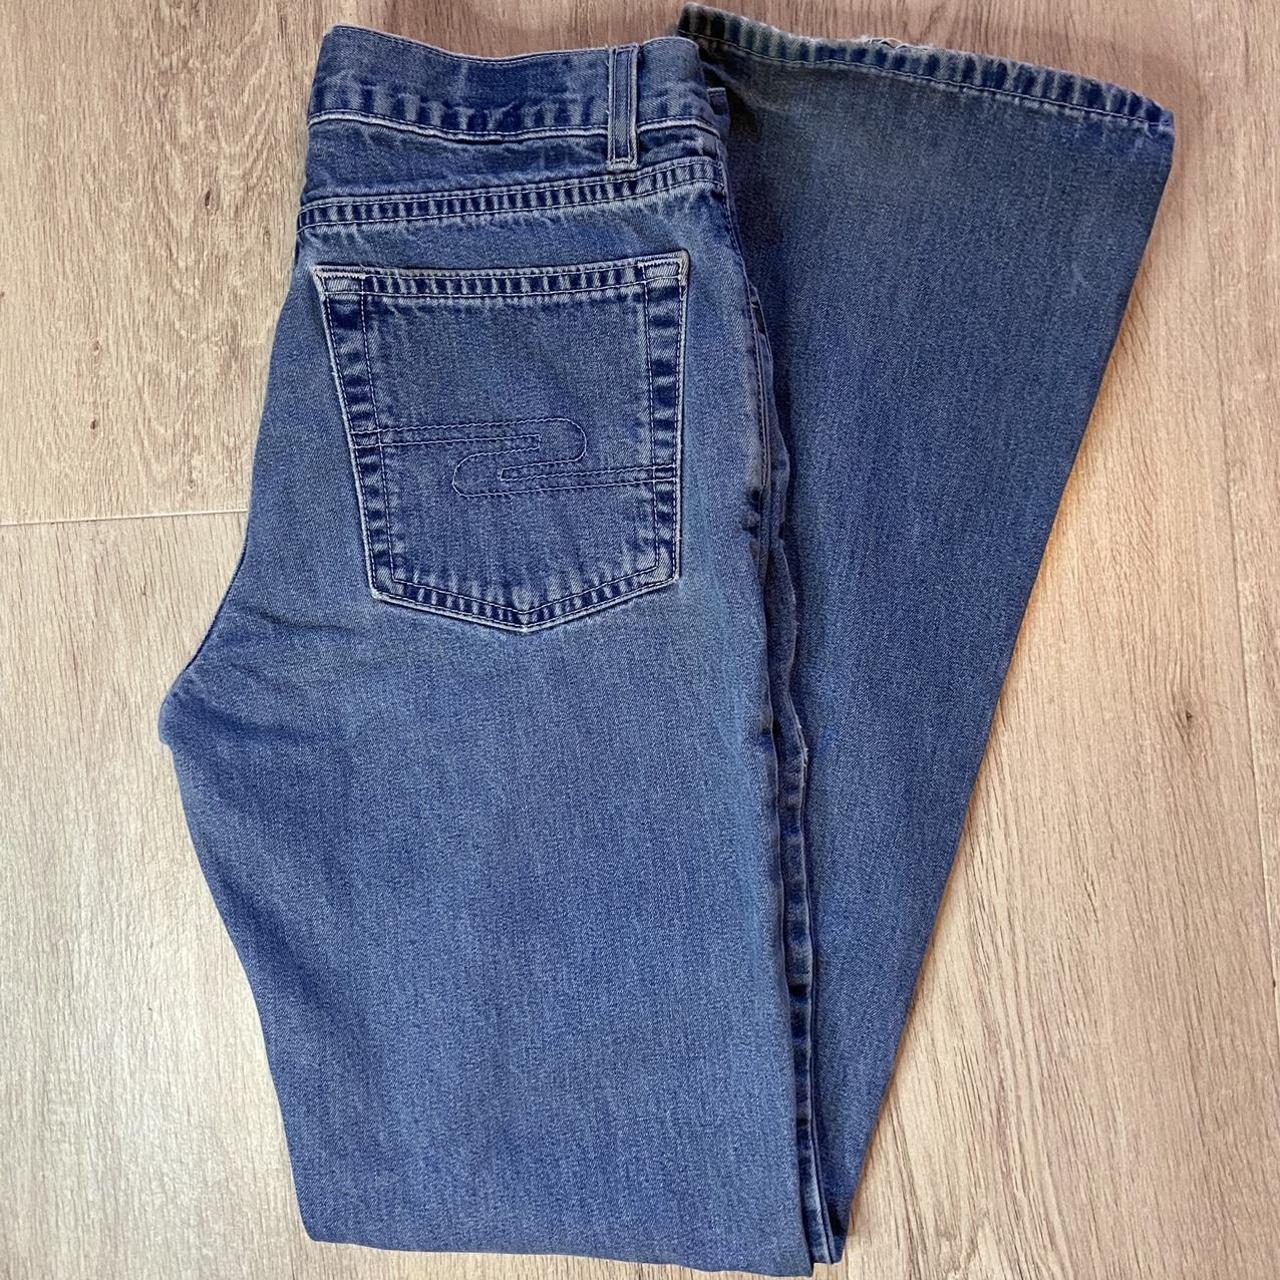 Levi's Women's Pink and Blue Jeans | Depop